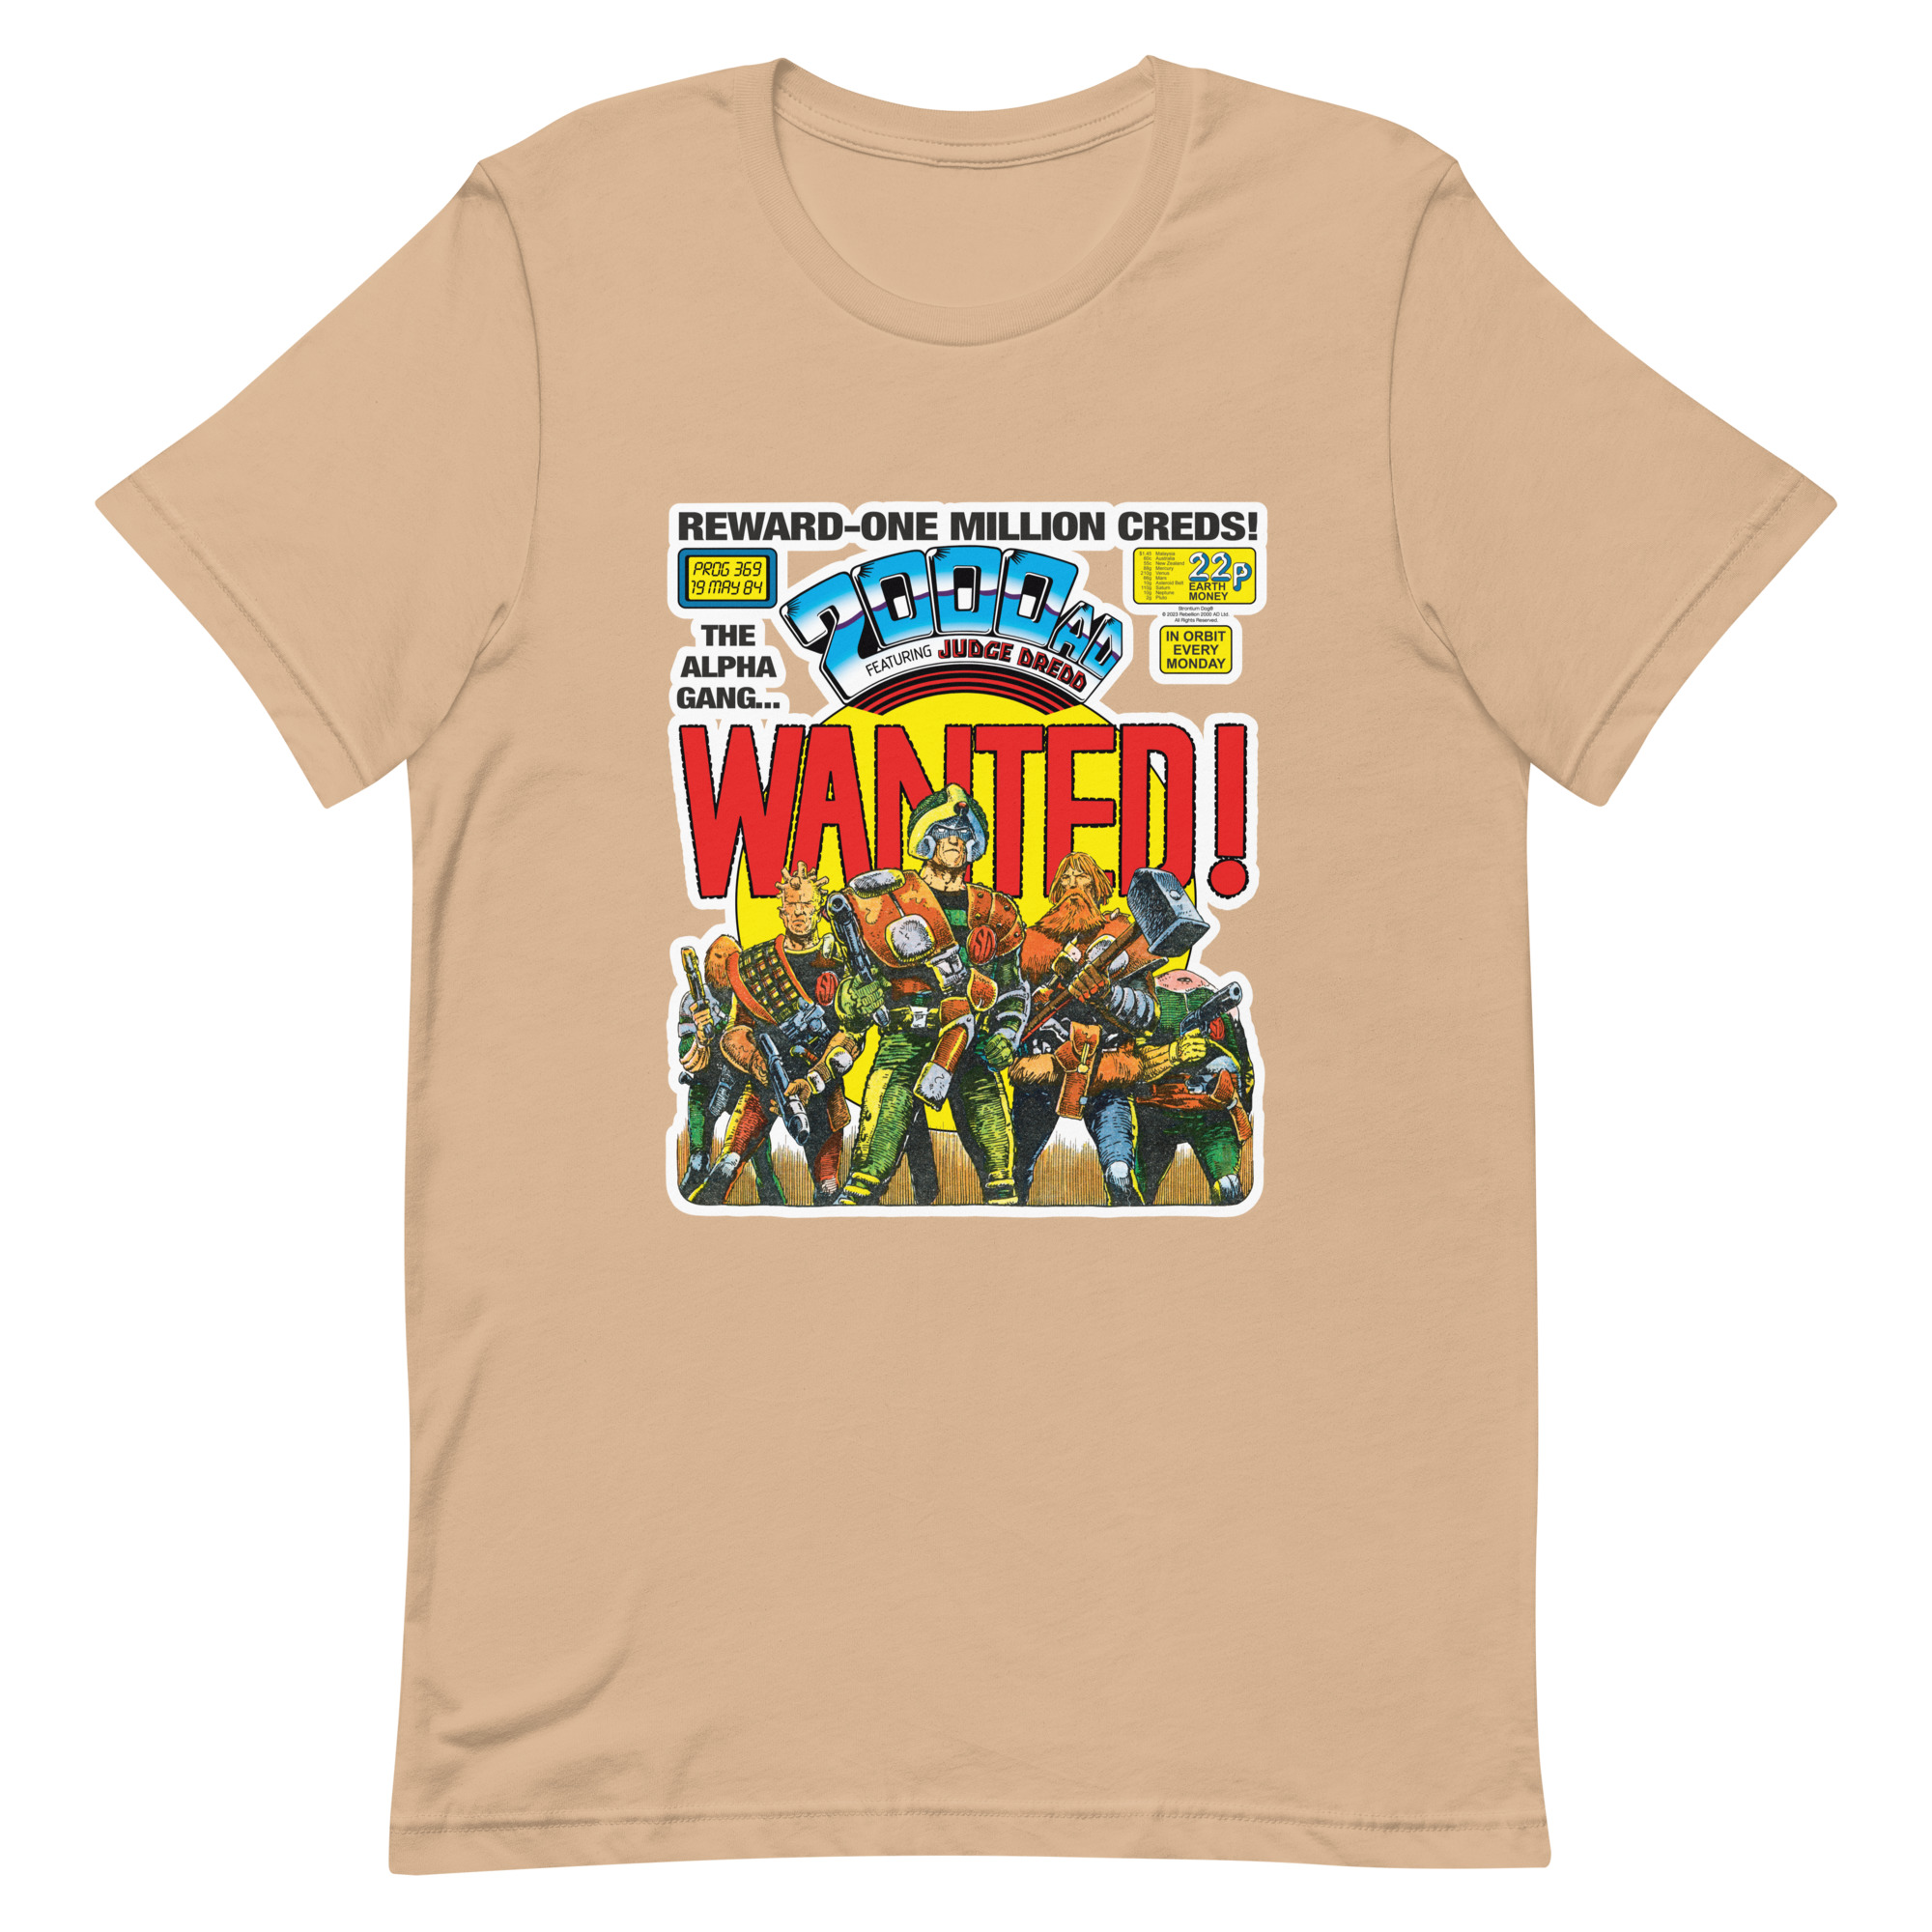 Beige Tshirt with a 'Classic' 2000 AD Cover image on the chest. In the image Strontium Dog and his team, the Alpha gang, stand ready.